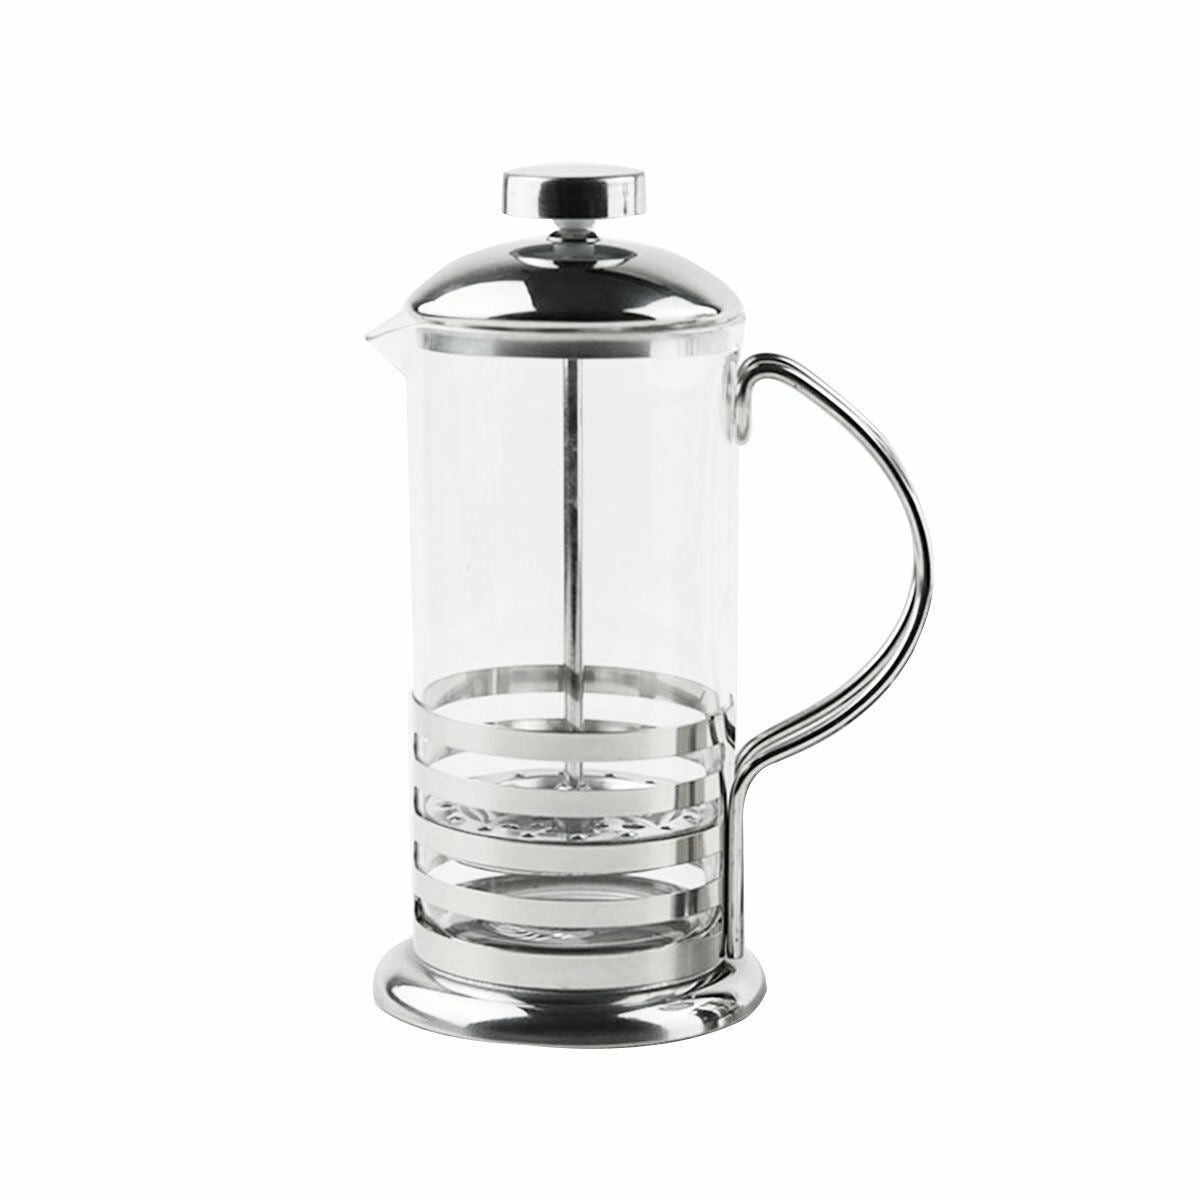 3 Cup Cafetiere, 350ml by Geezy - UKBuyZone